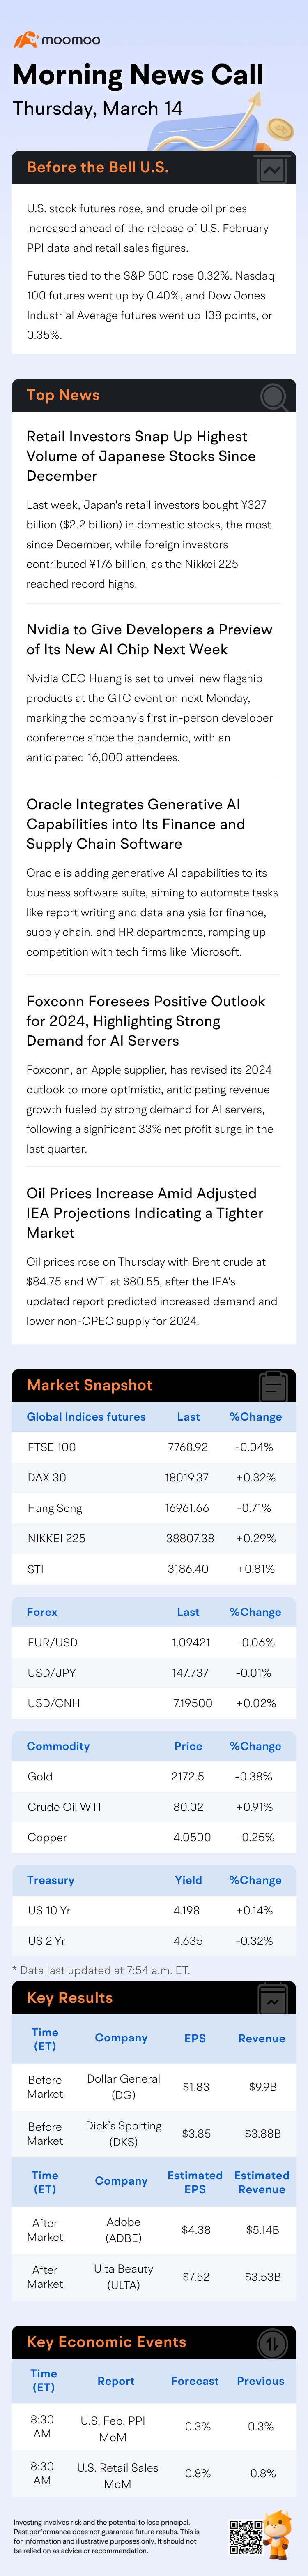 Morning News Call | U.S. Stock Futures and Crude Oil Prices Rose Ahead of PPI Data Release